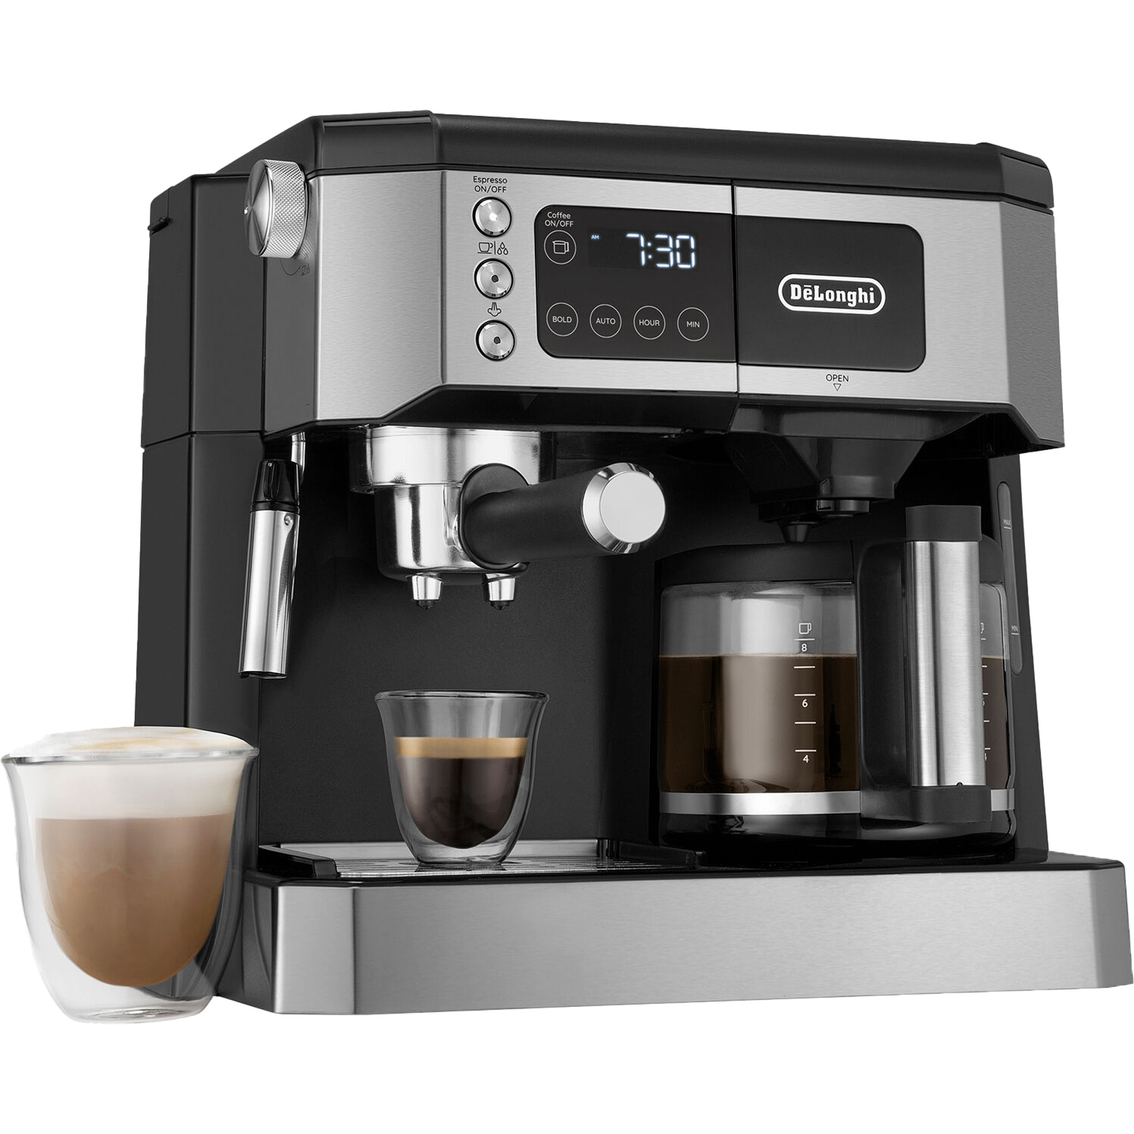 De'Longhi All-In-One Combination Coffee and Espresso Machine - Image 1 of 6